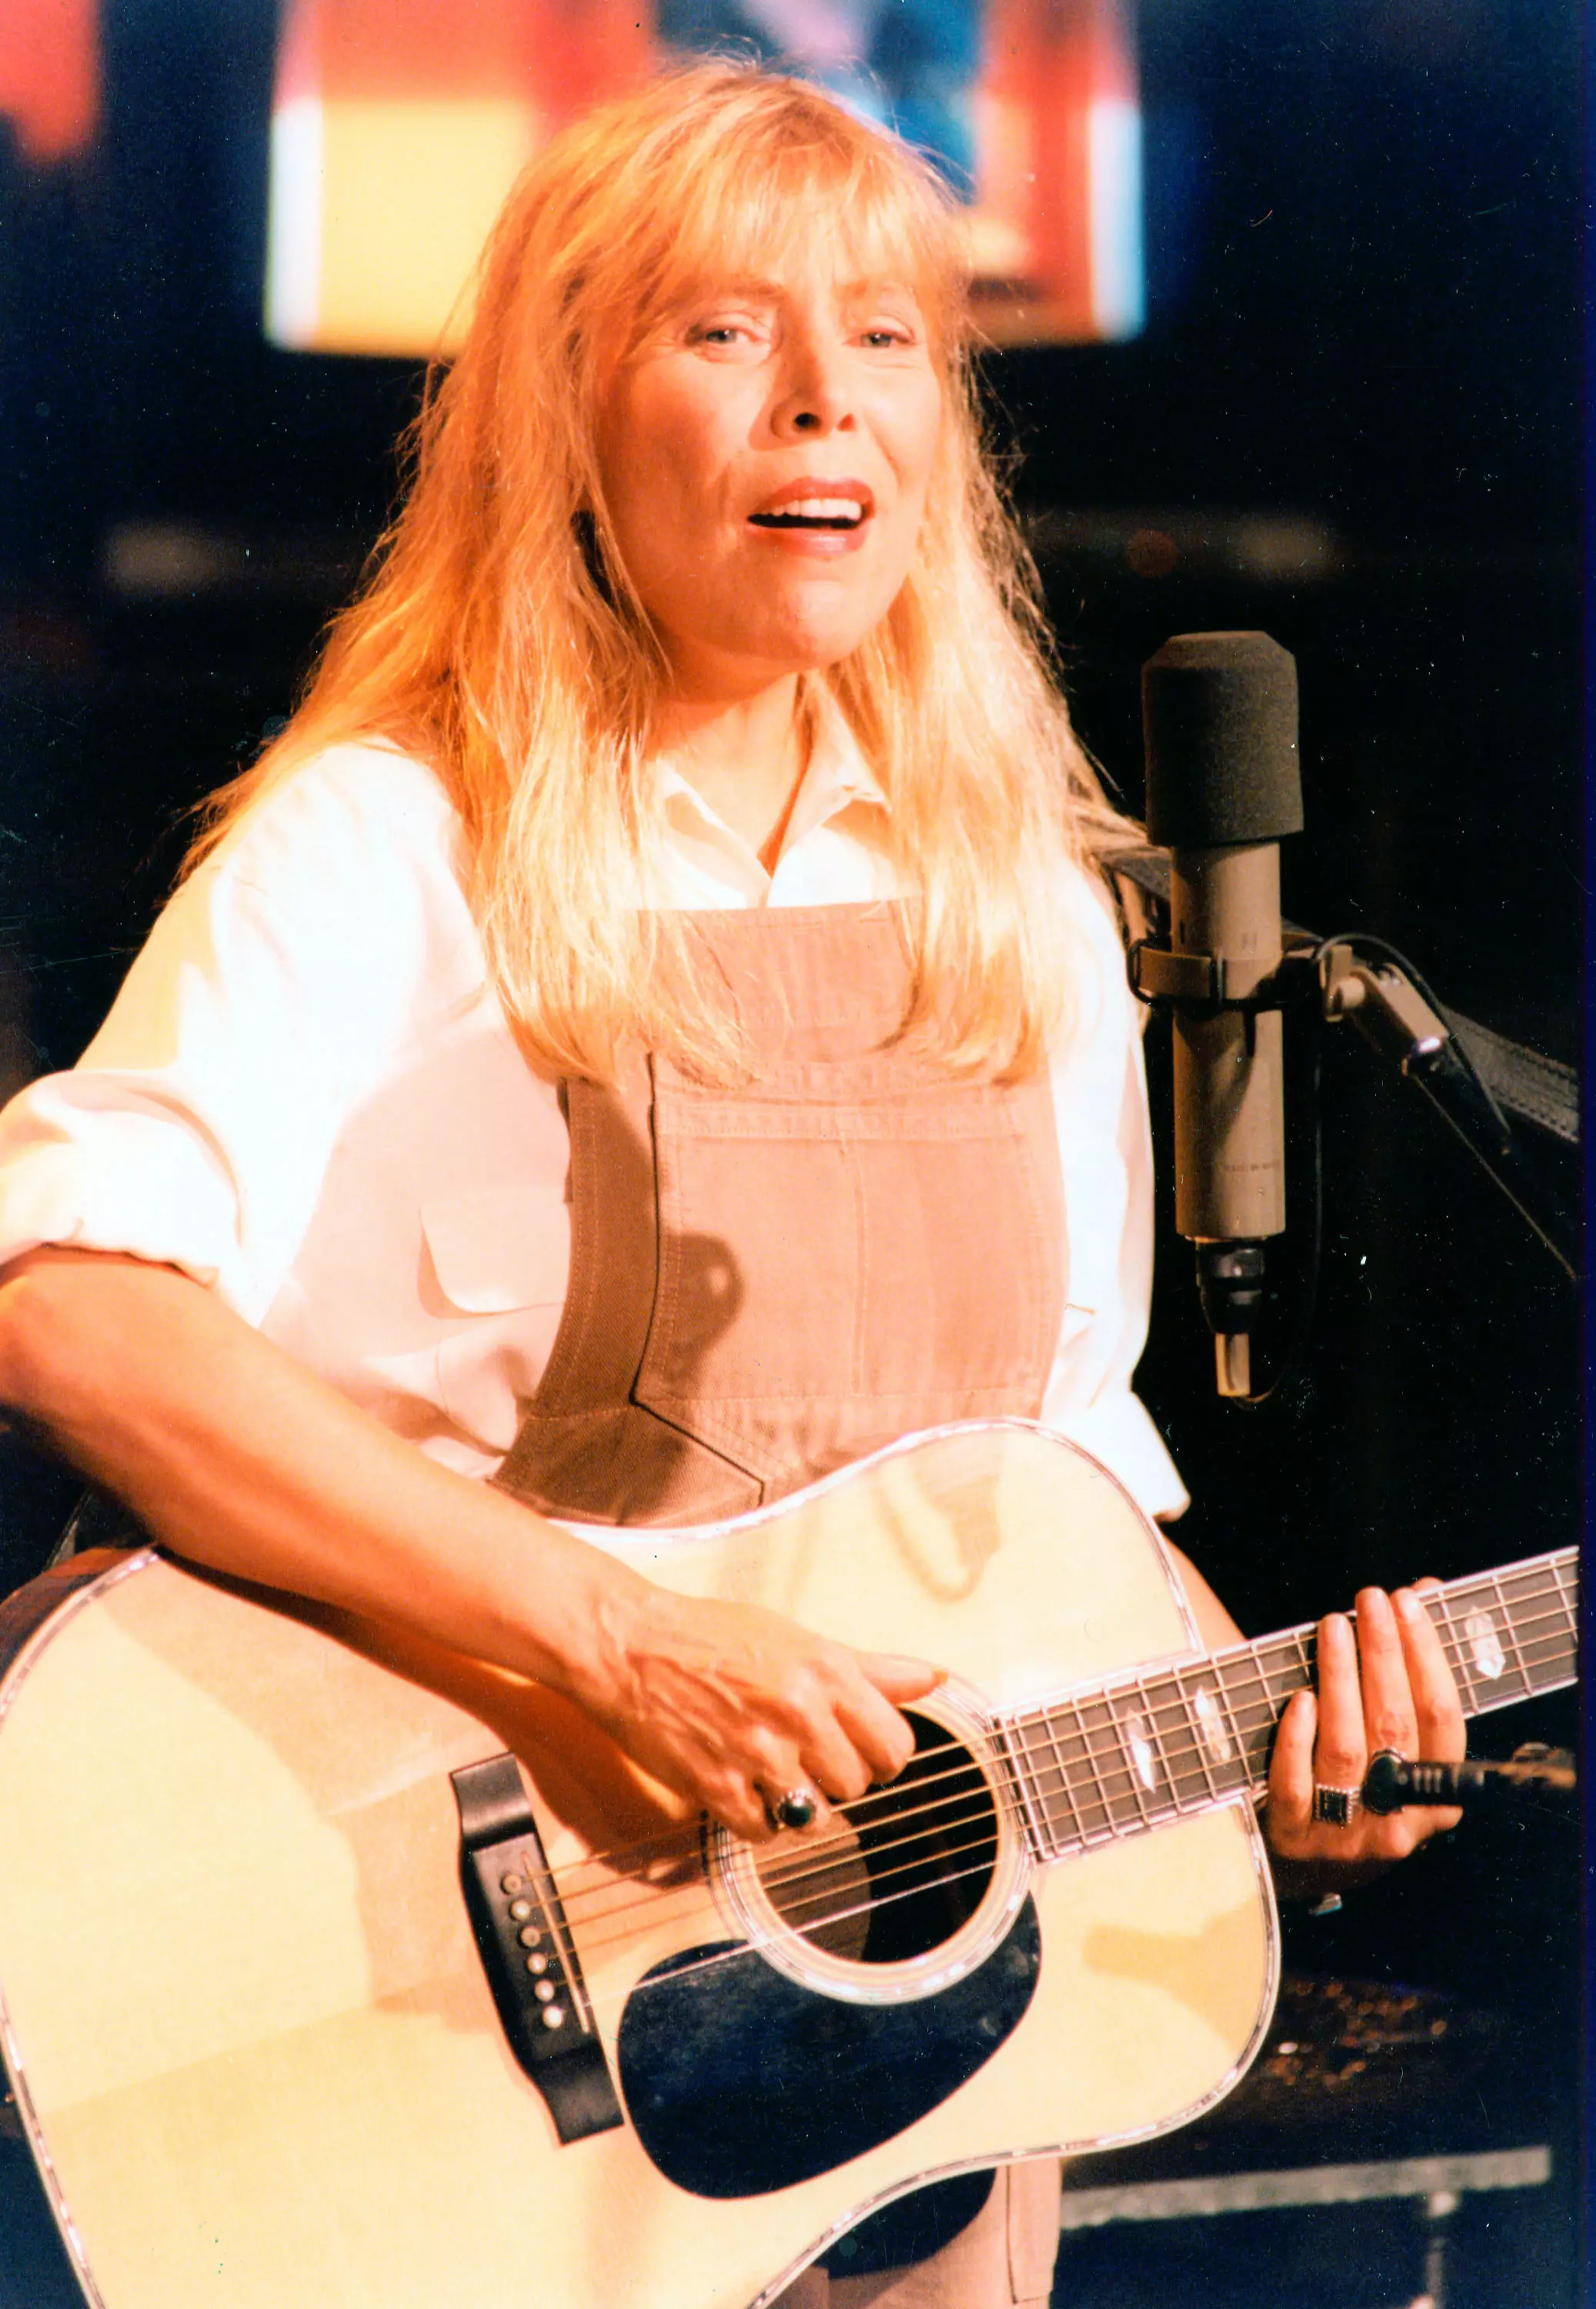 Joni Mitchell recorded the original version of 'Big Yellow Taxi' in 1970.